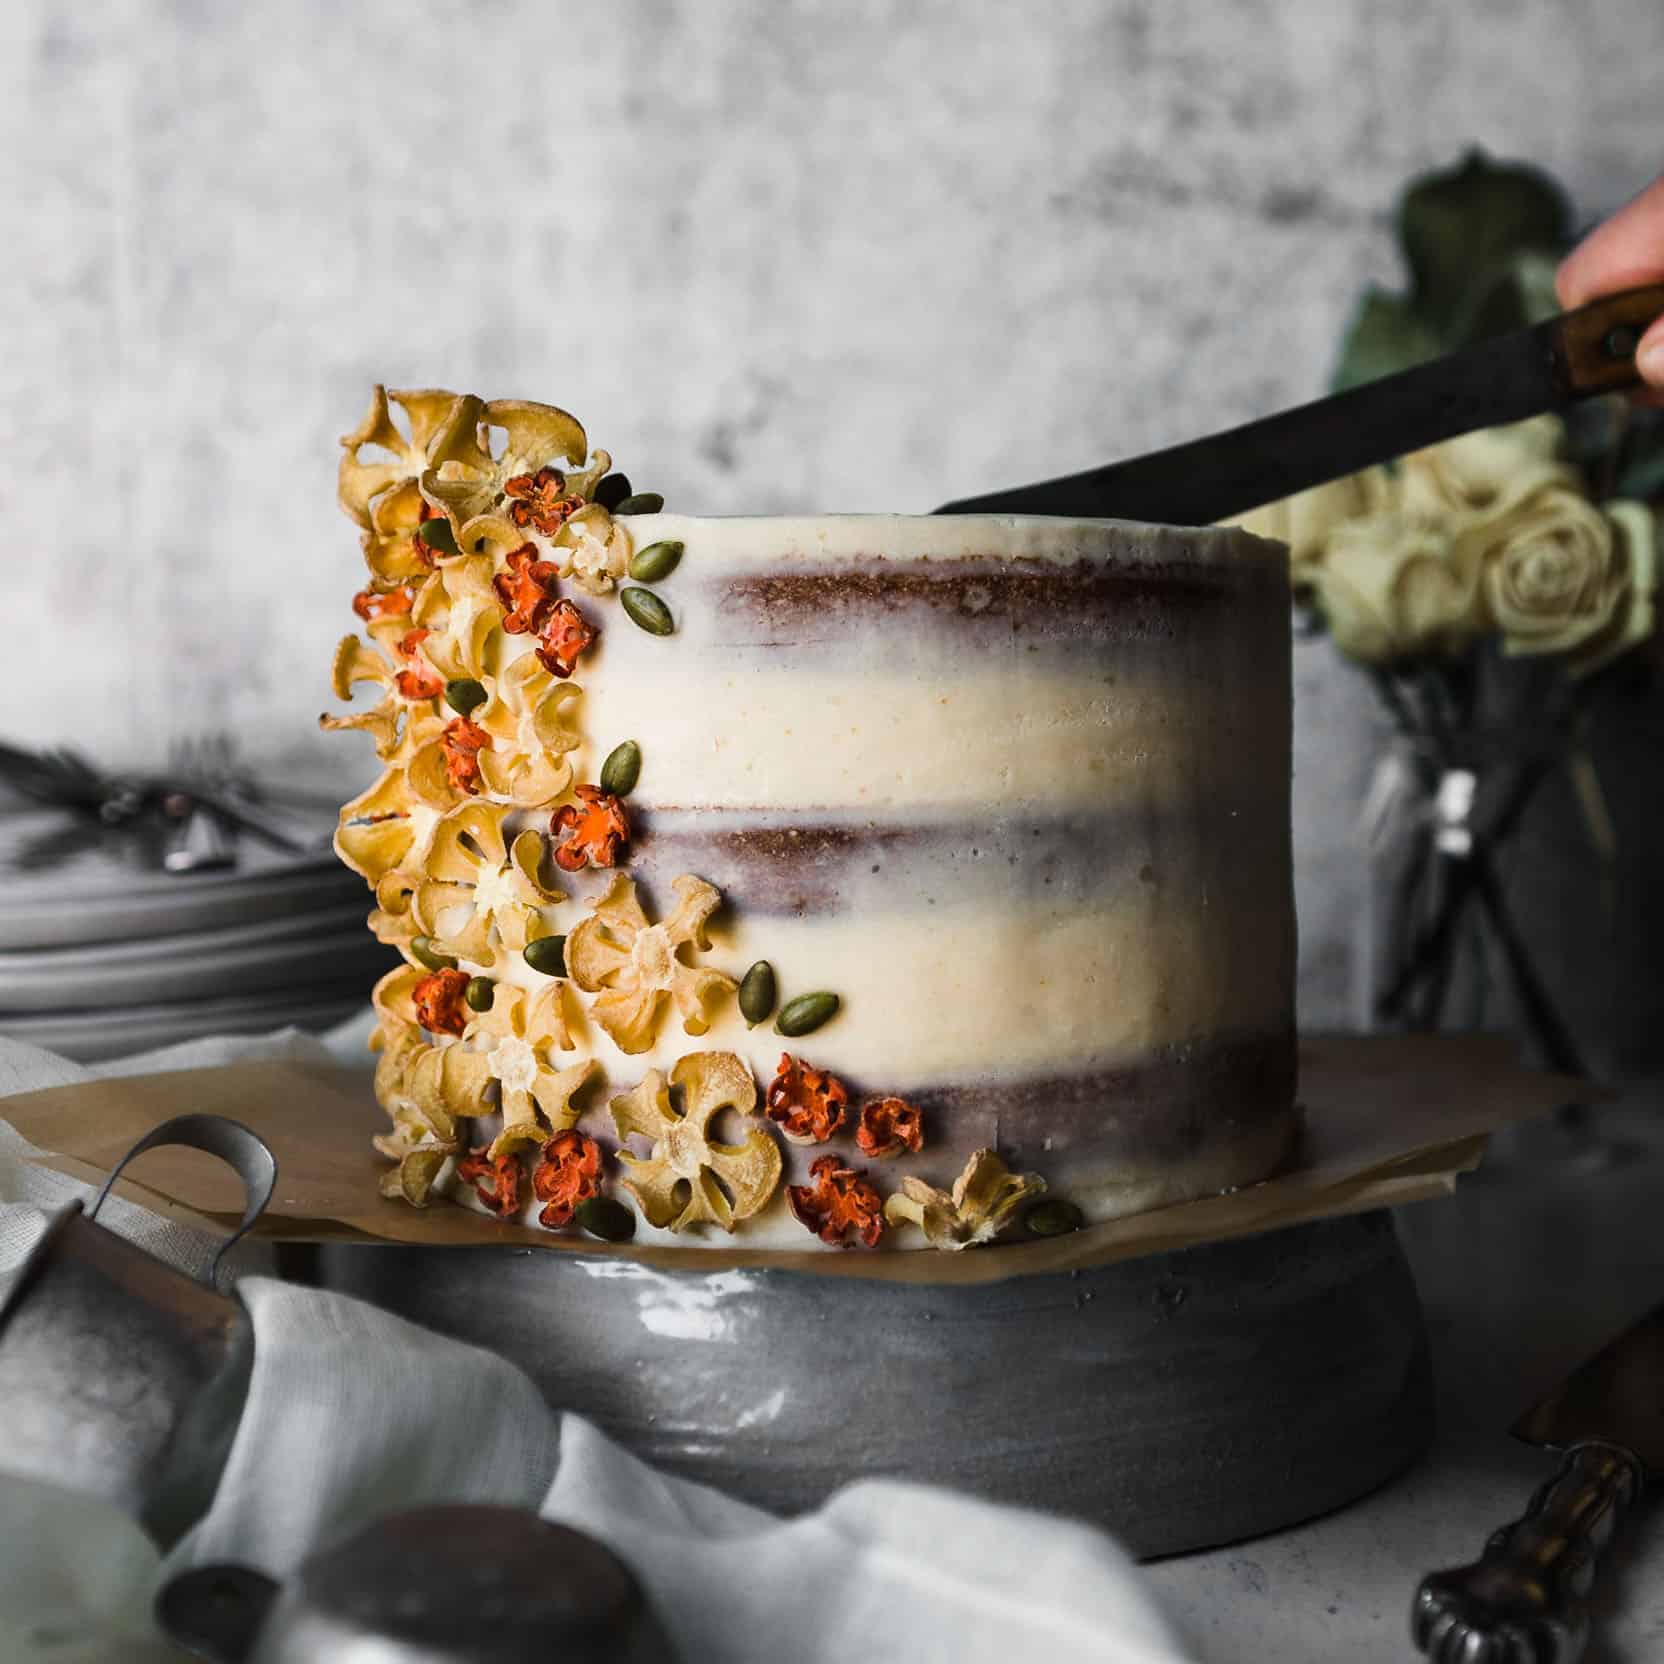 A knife cutting into a carrot spice cake that is semi-naked frosted with brown butter buttercream